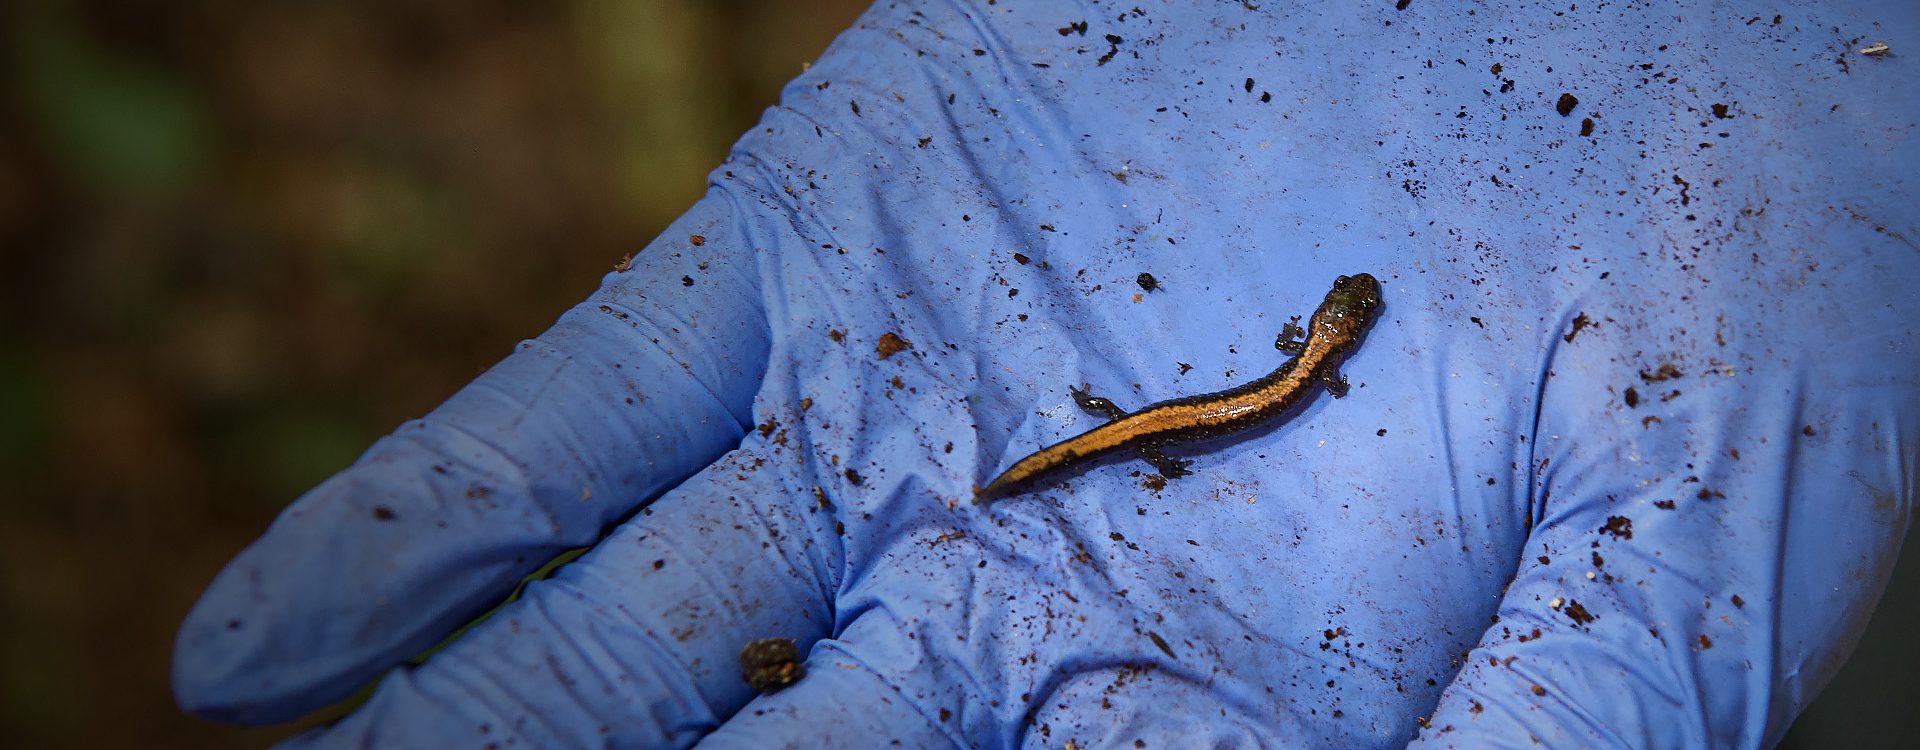 A small salamander sits in the center of a gloved hand